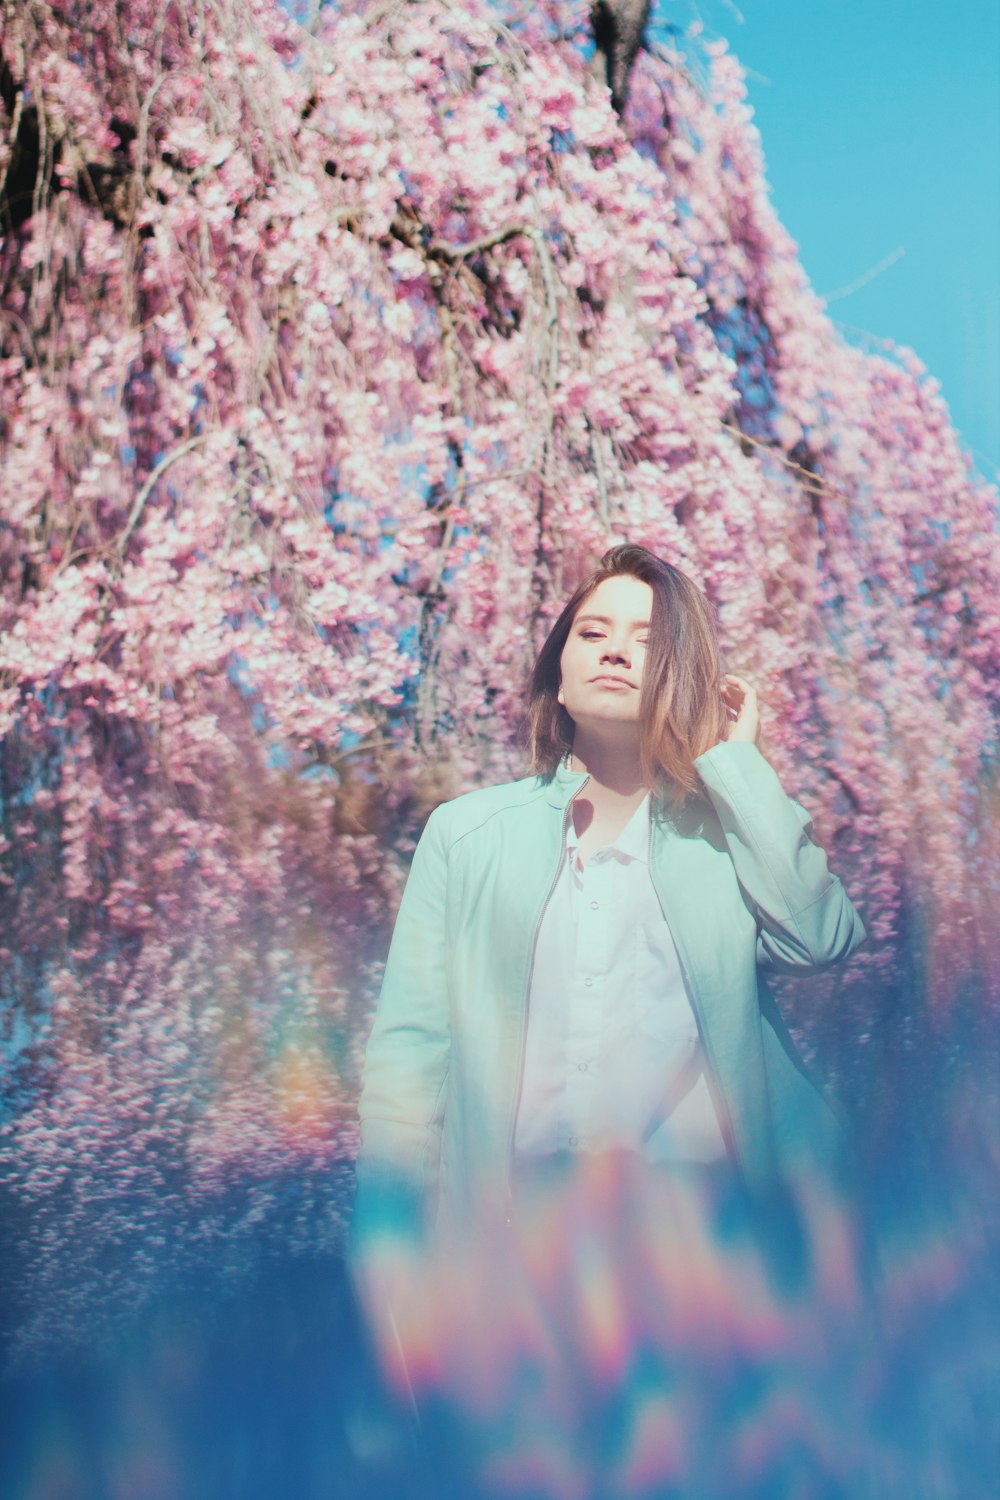 woman in white button up long sleeve shirt standing near pink leaf trees during daytime